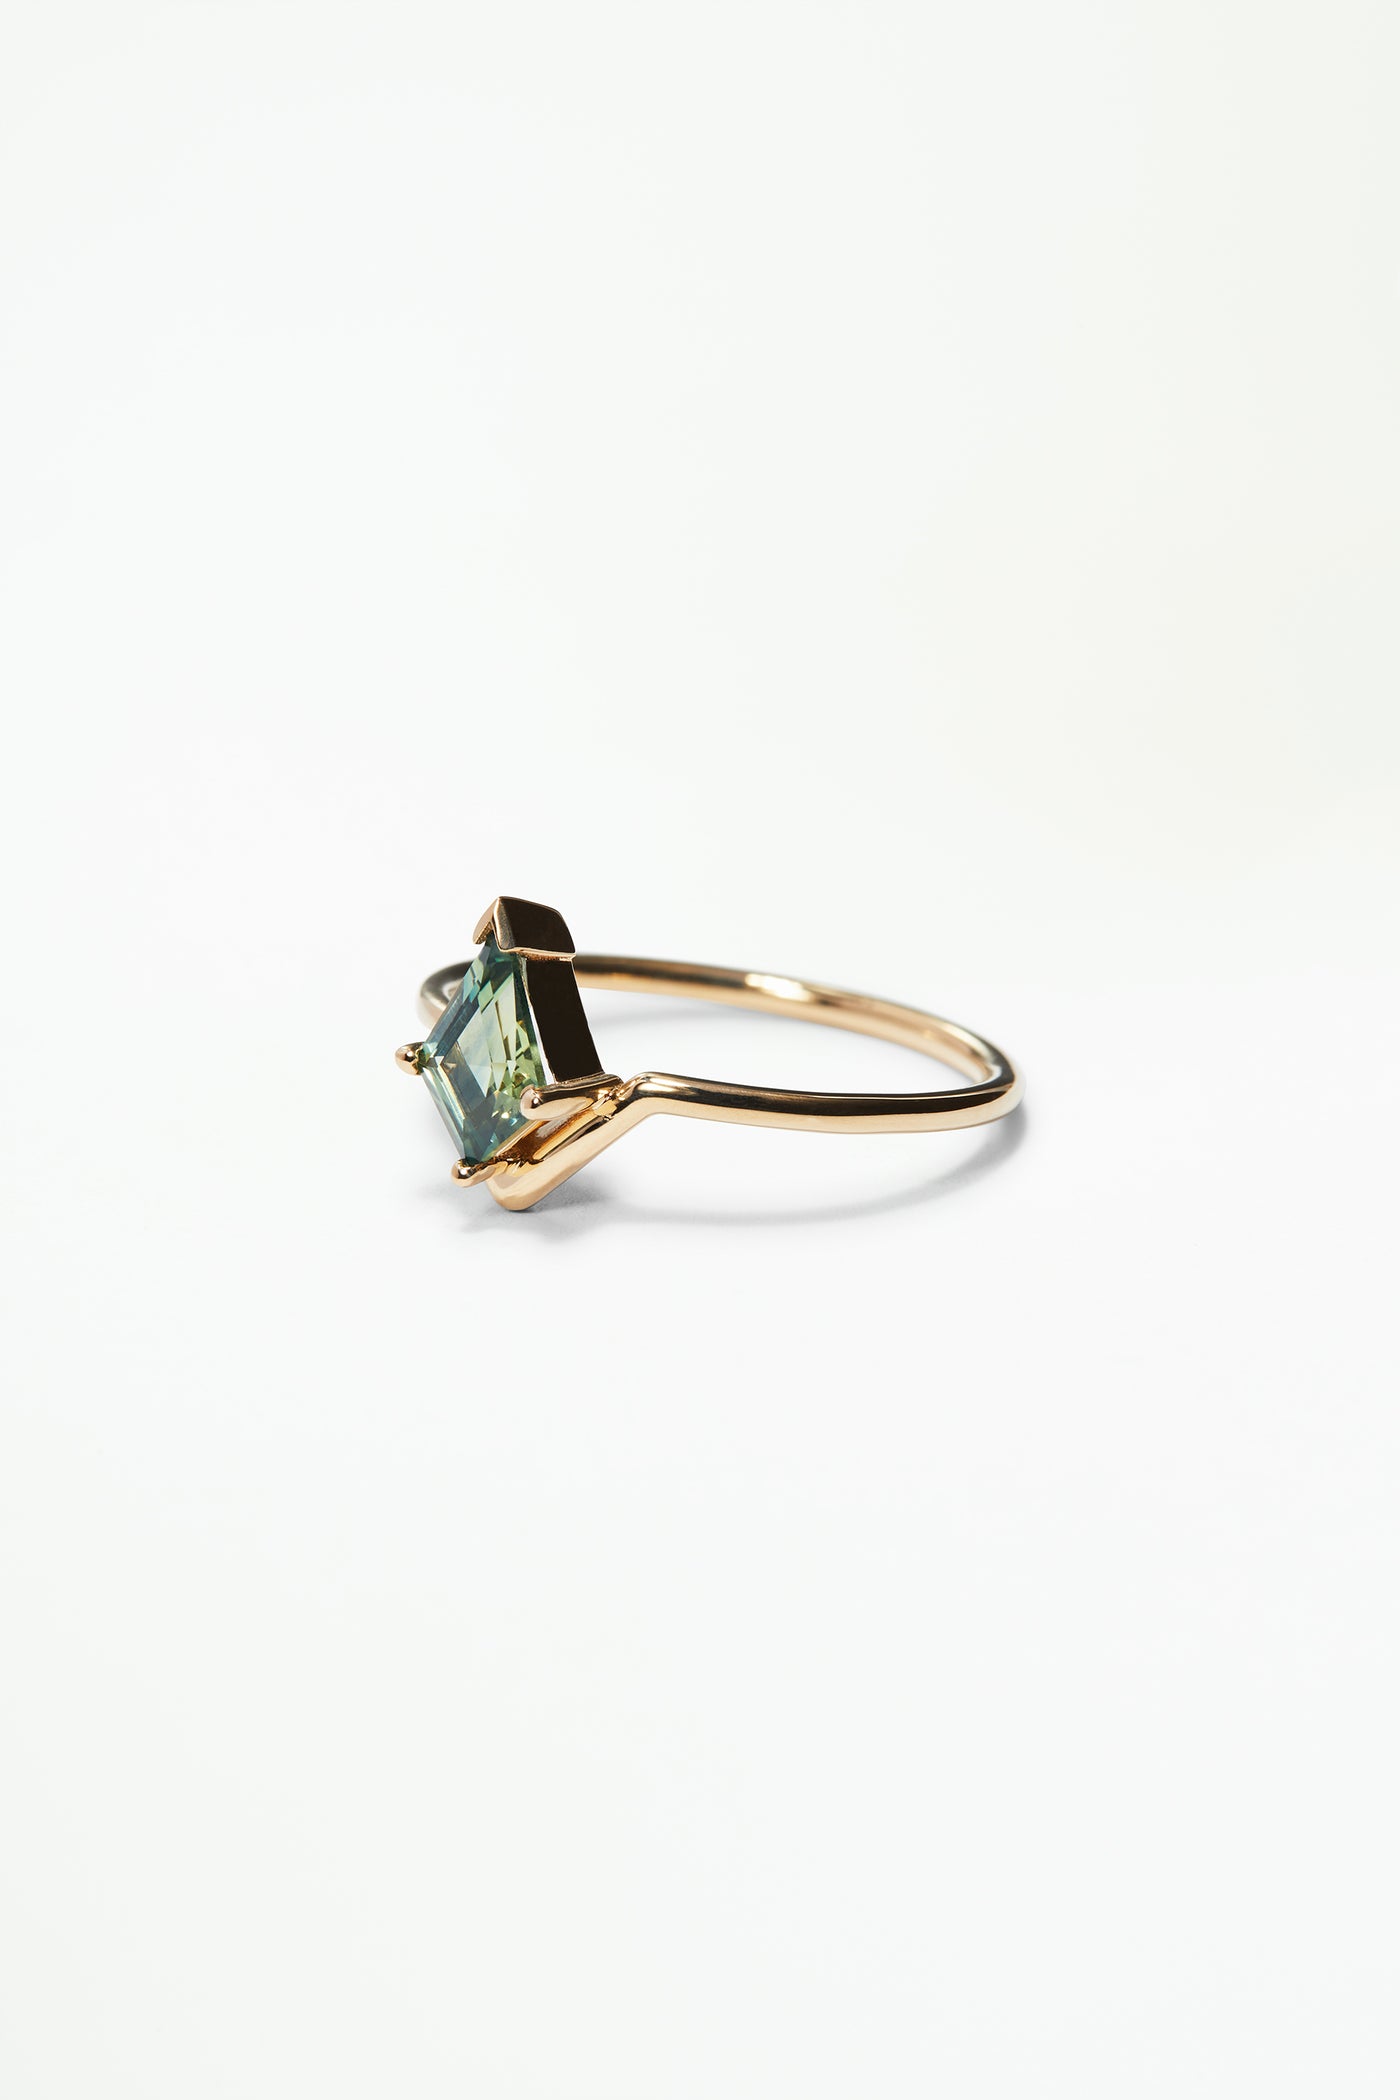 One of a Kind Nestled Kite Ring